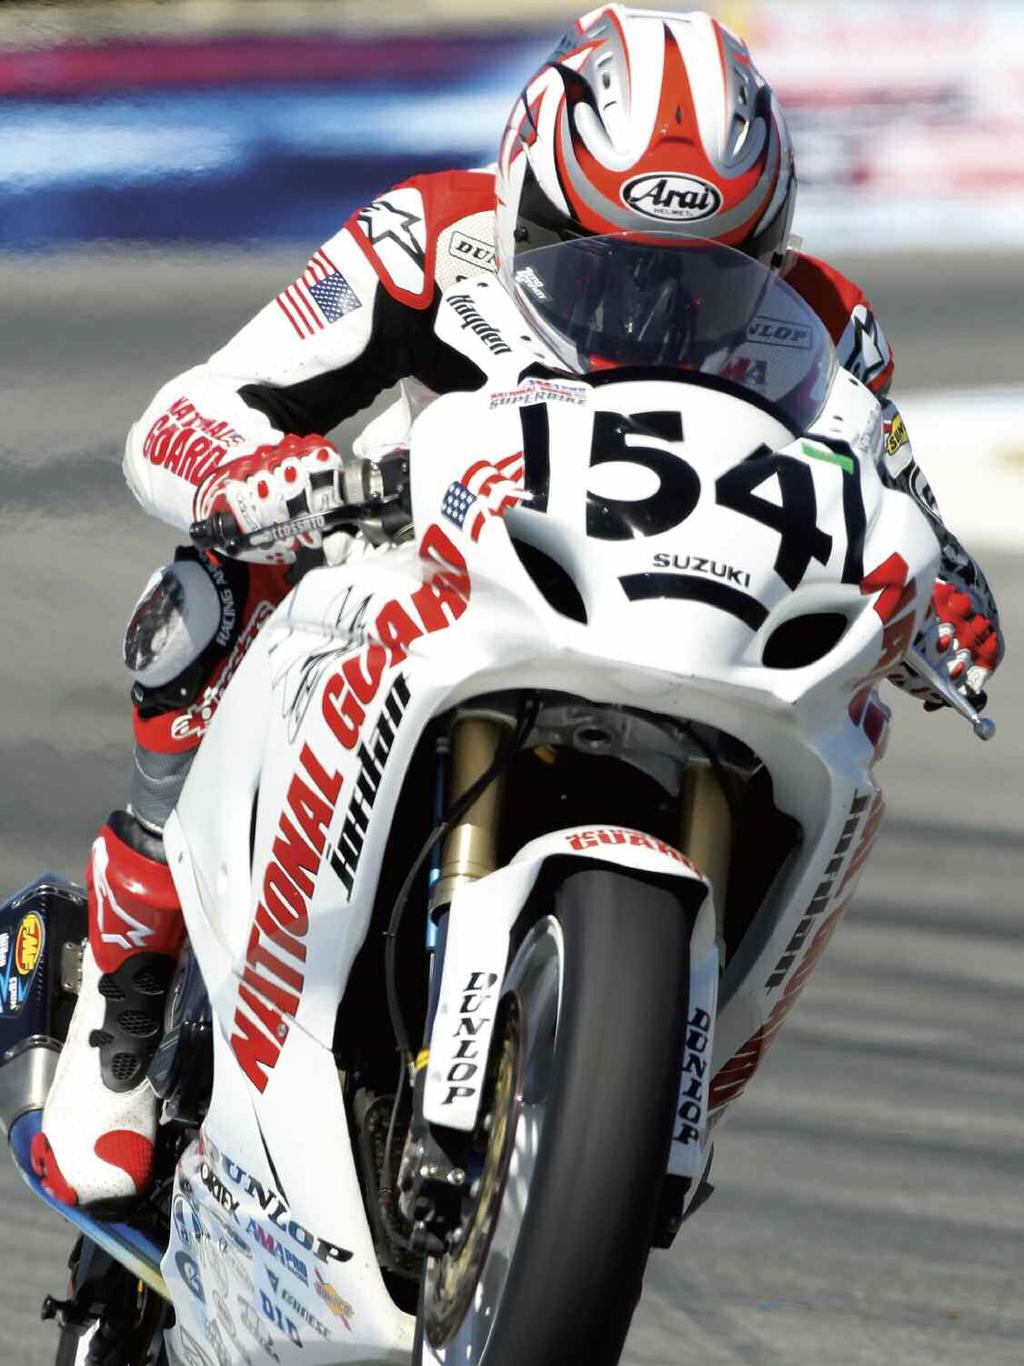 WHY THE NATIONAL GUARD LOVES AMA PRO ROAD RACING The National Guard made its way into the AMA Pro Road Racing paddock in 2009 with the sponsorship of Geoff May as the rider of the number 54 Superbike